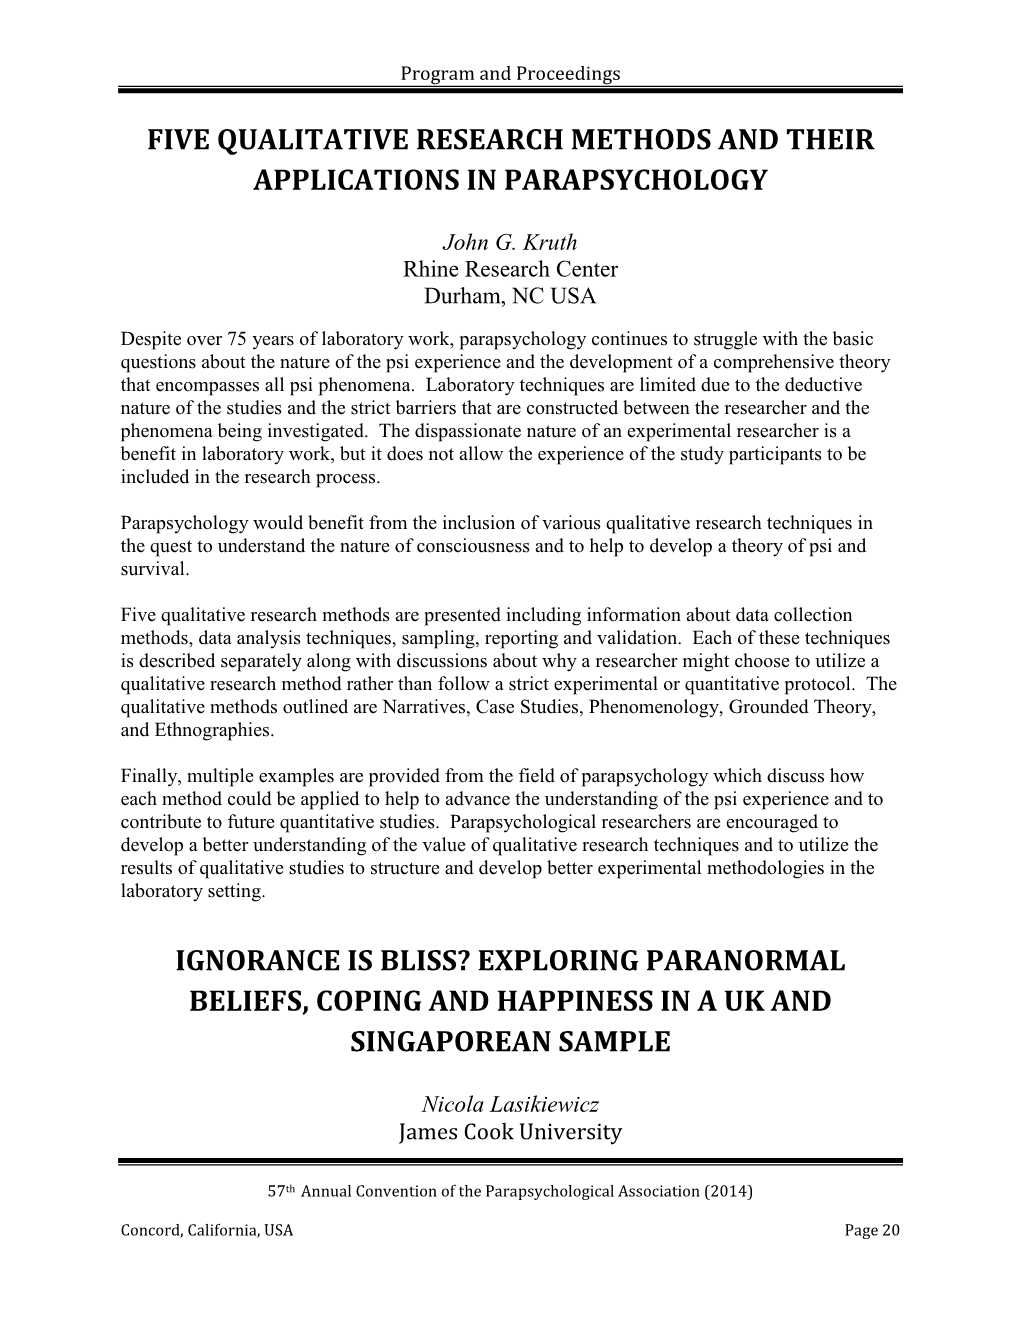 Five Qualitative Research Methods and Their Applications in Parapsychology